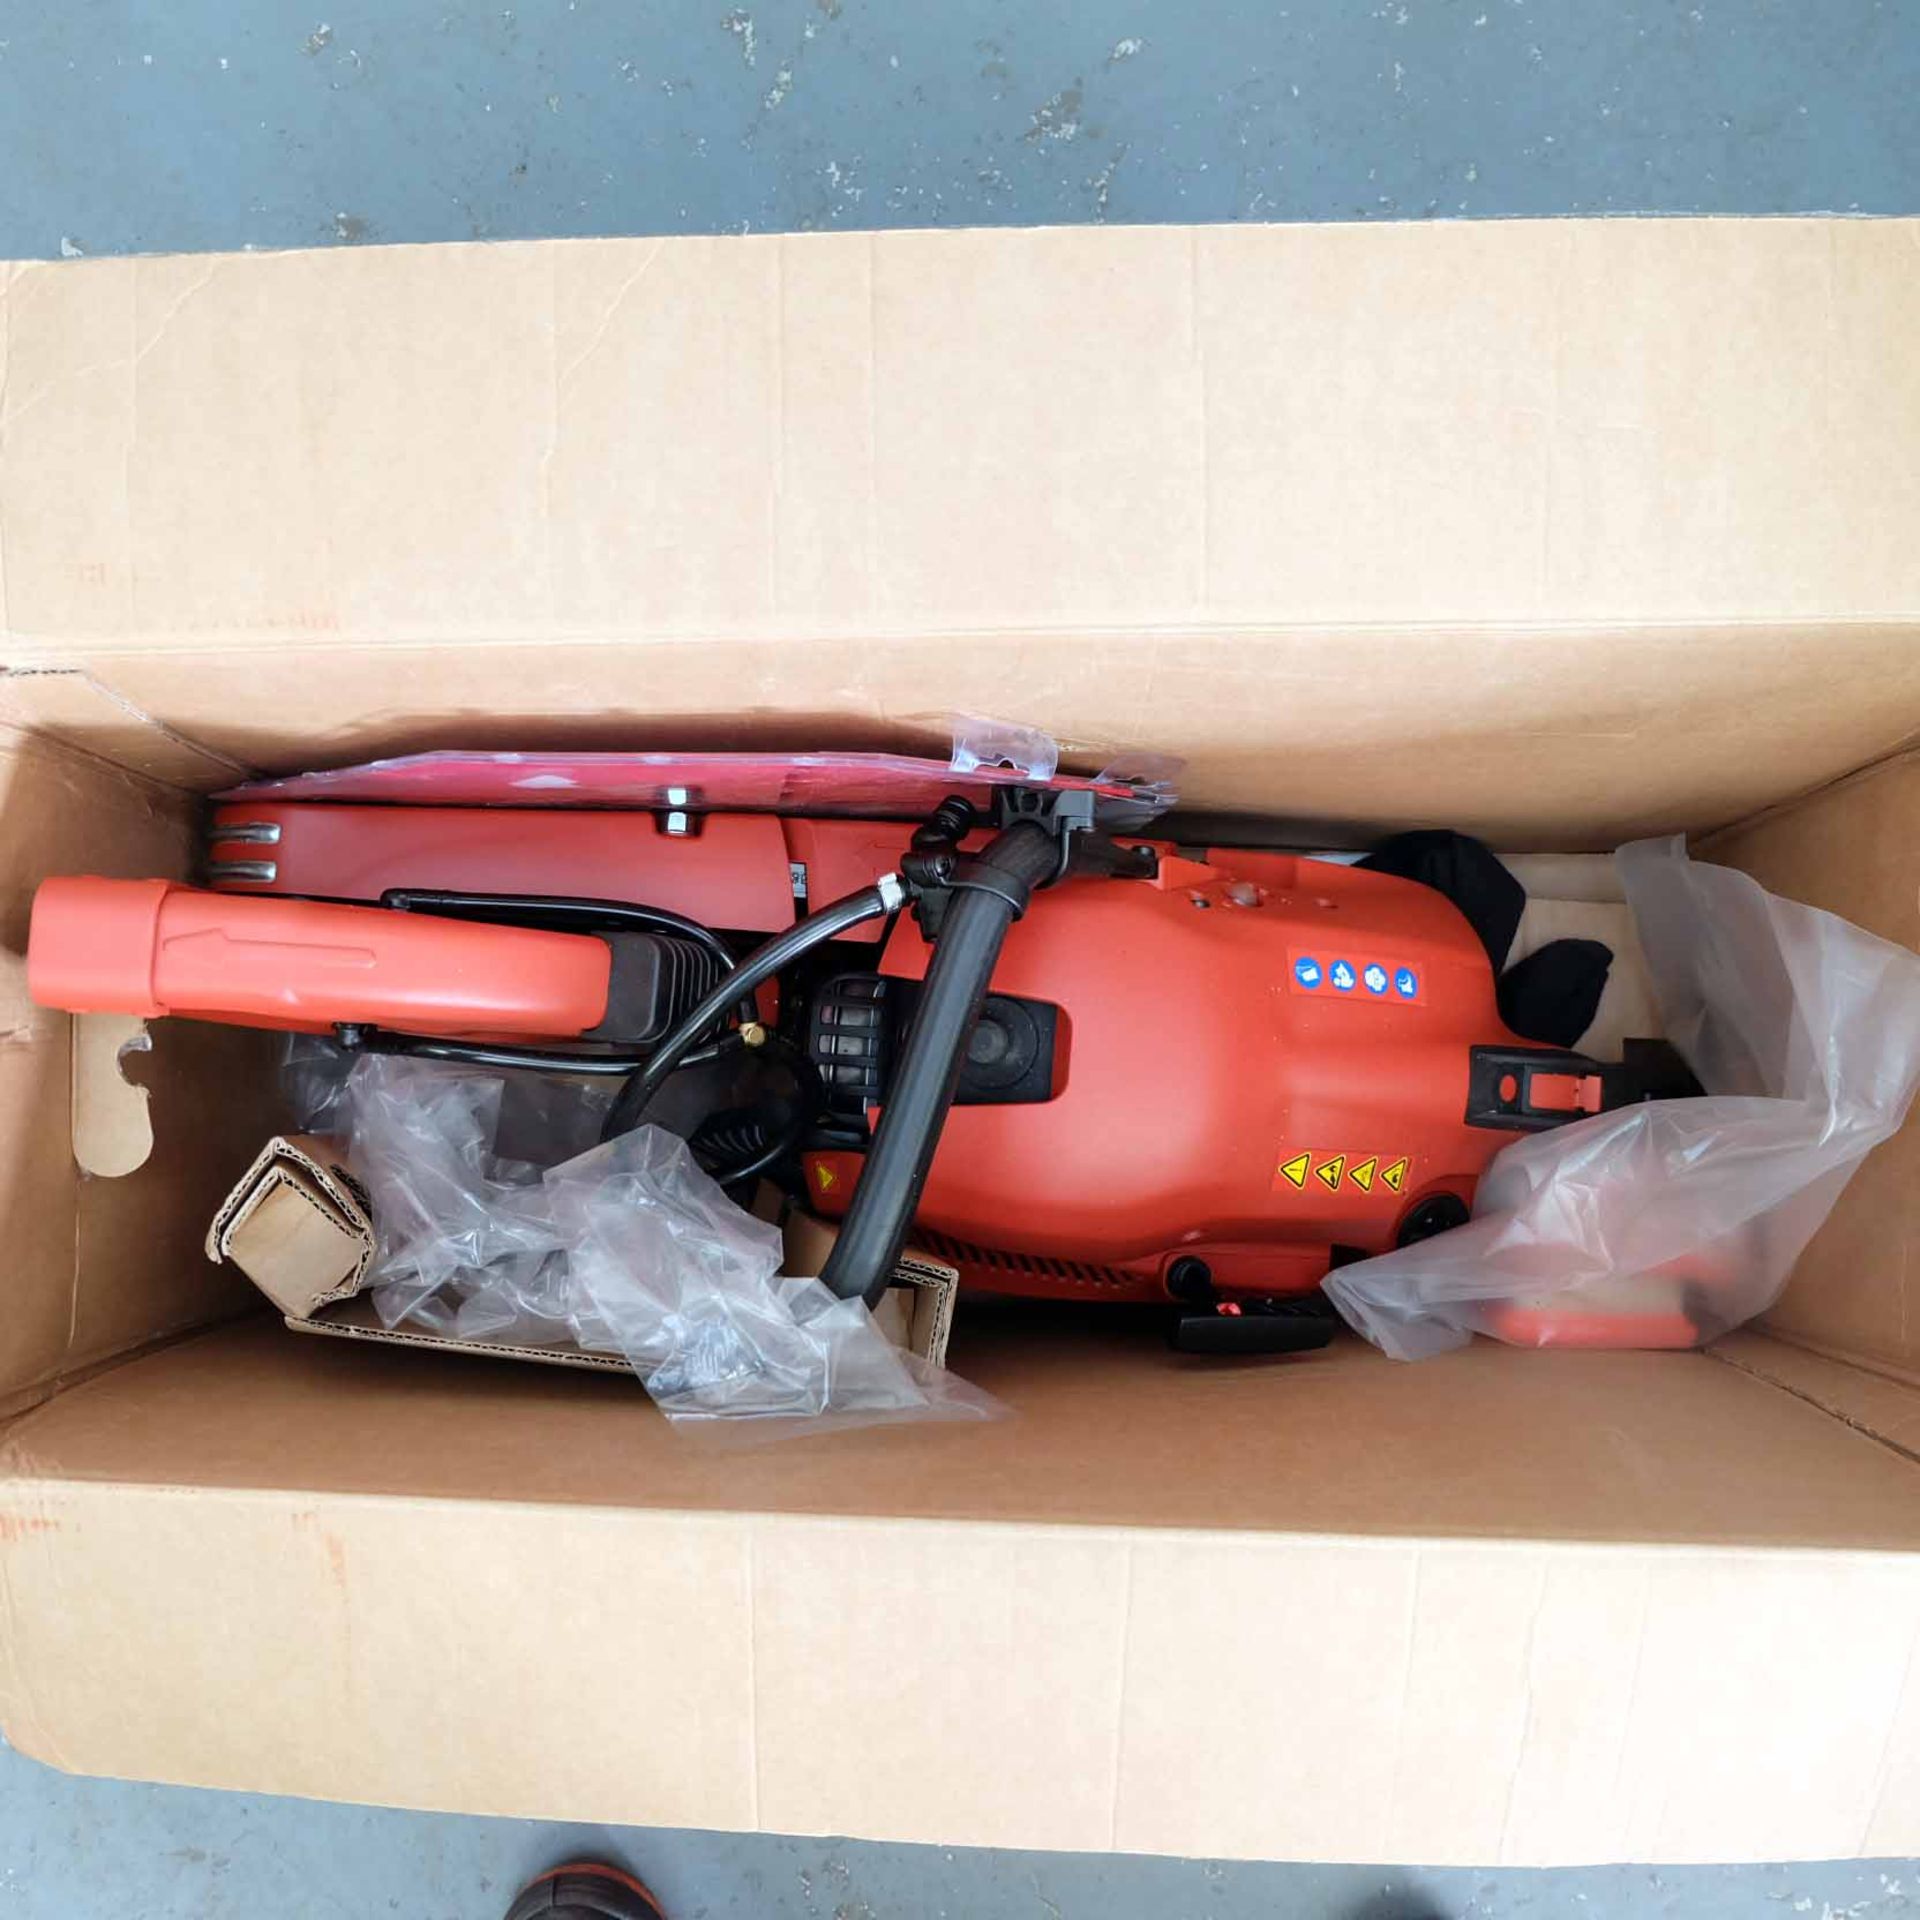 Hilti Hand Held Gas Saw. Model DSH 900-X 16". Complete With SP-16"x1" Blade. Easy Start Auto-Choke S - Image 21 of 25